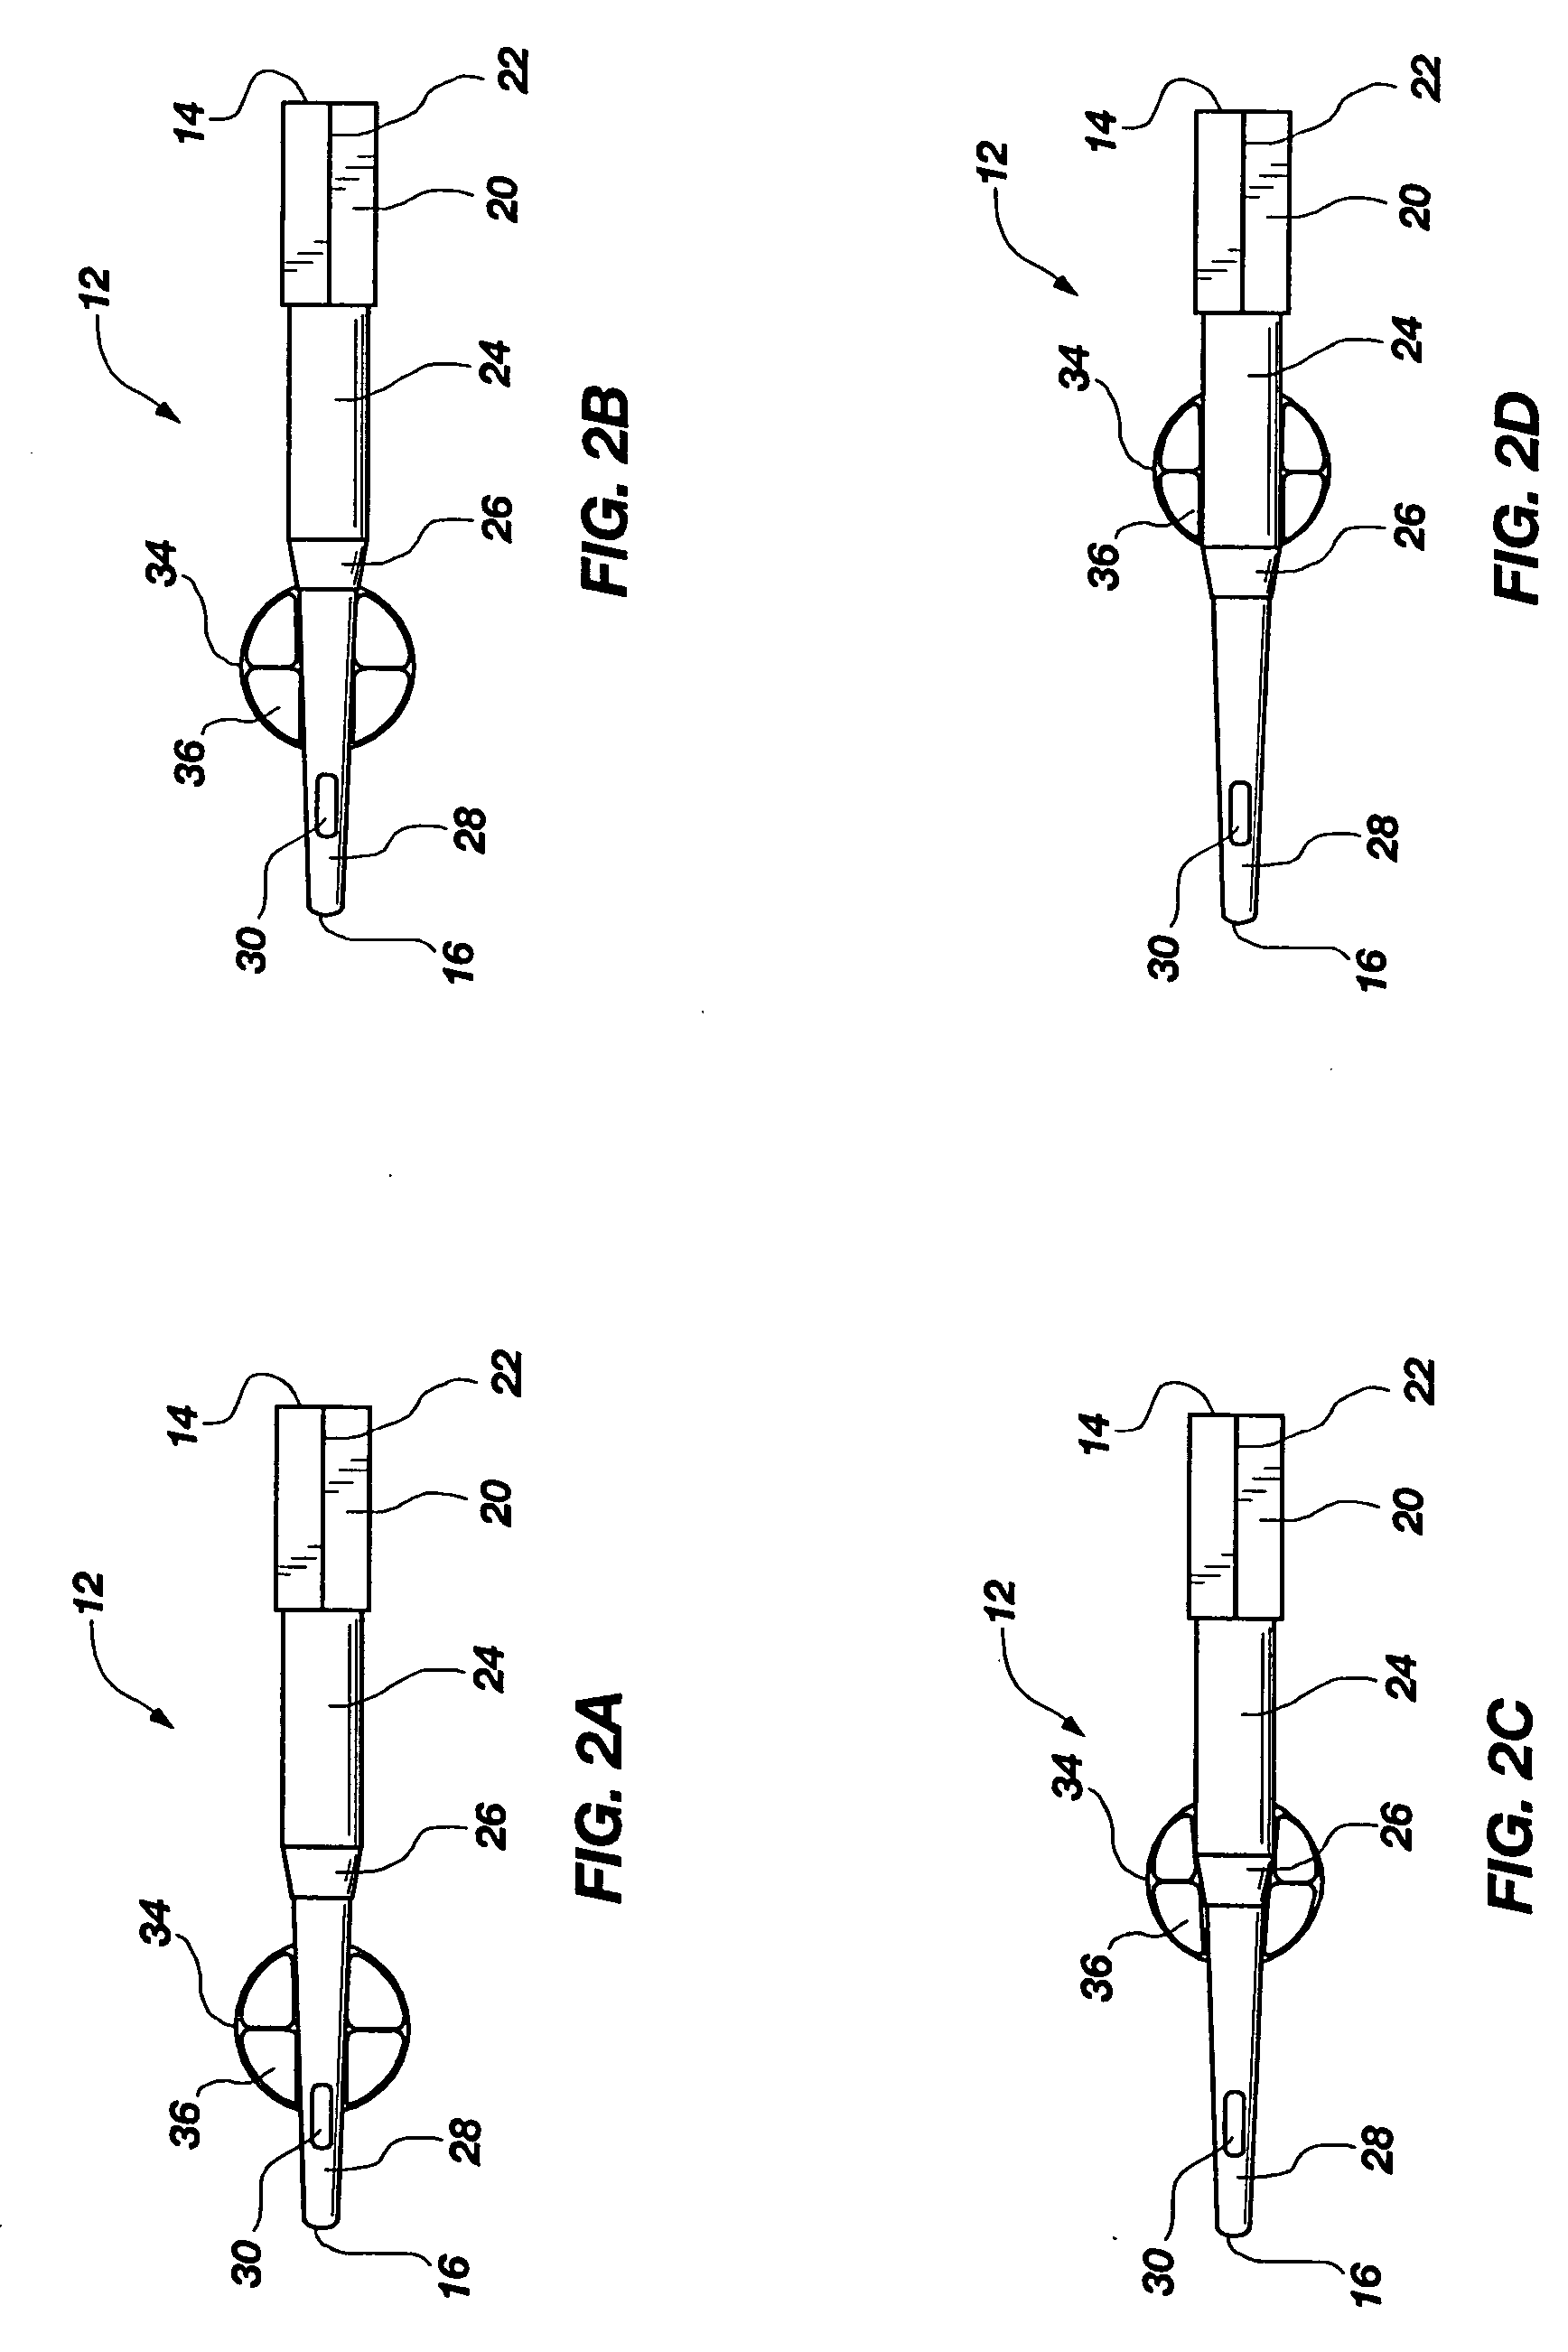 Method and implant for securing ligament replacement into the knee